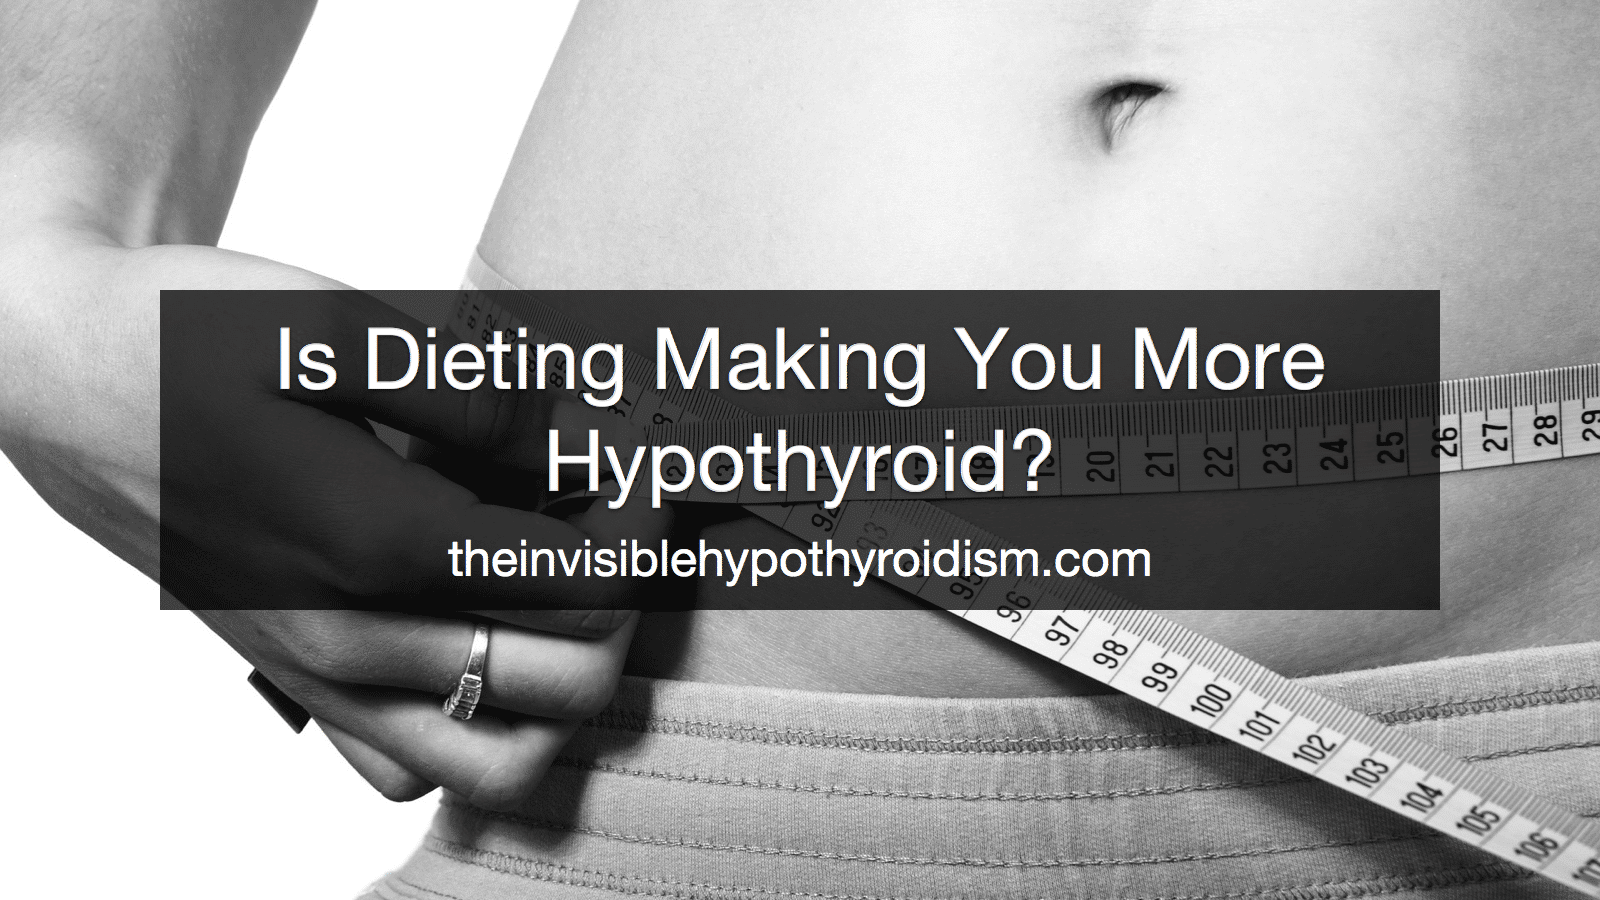 Is Dieting Making You More Hypothyroid?